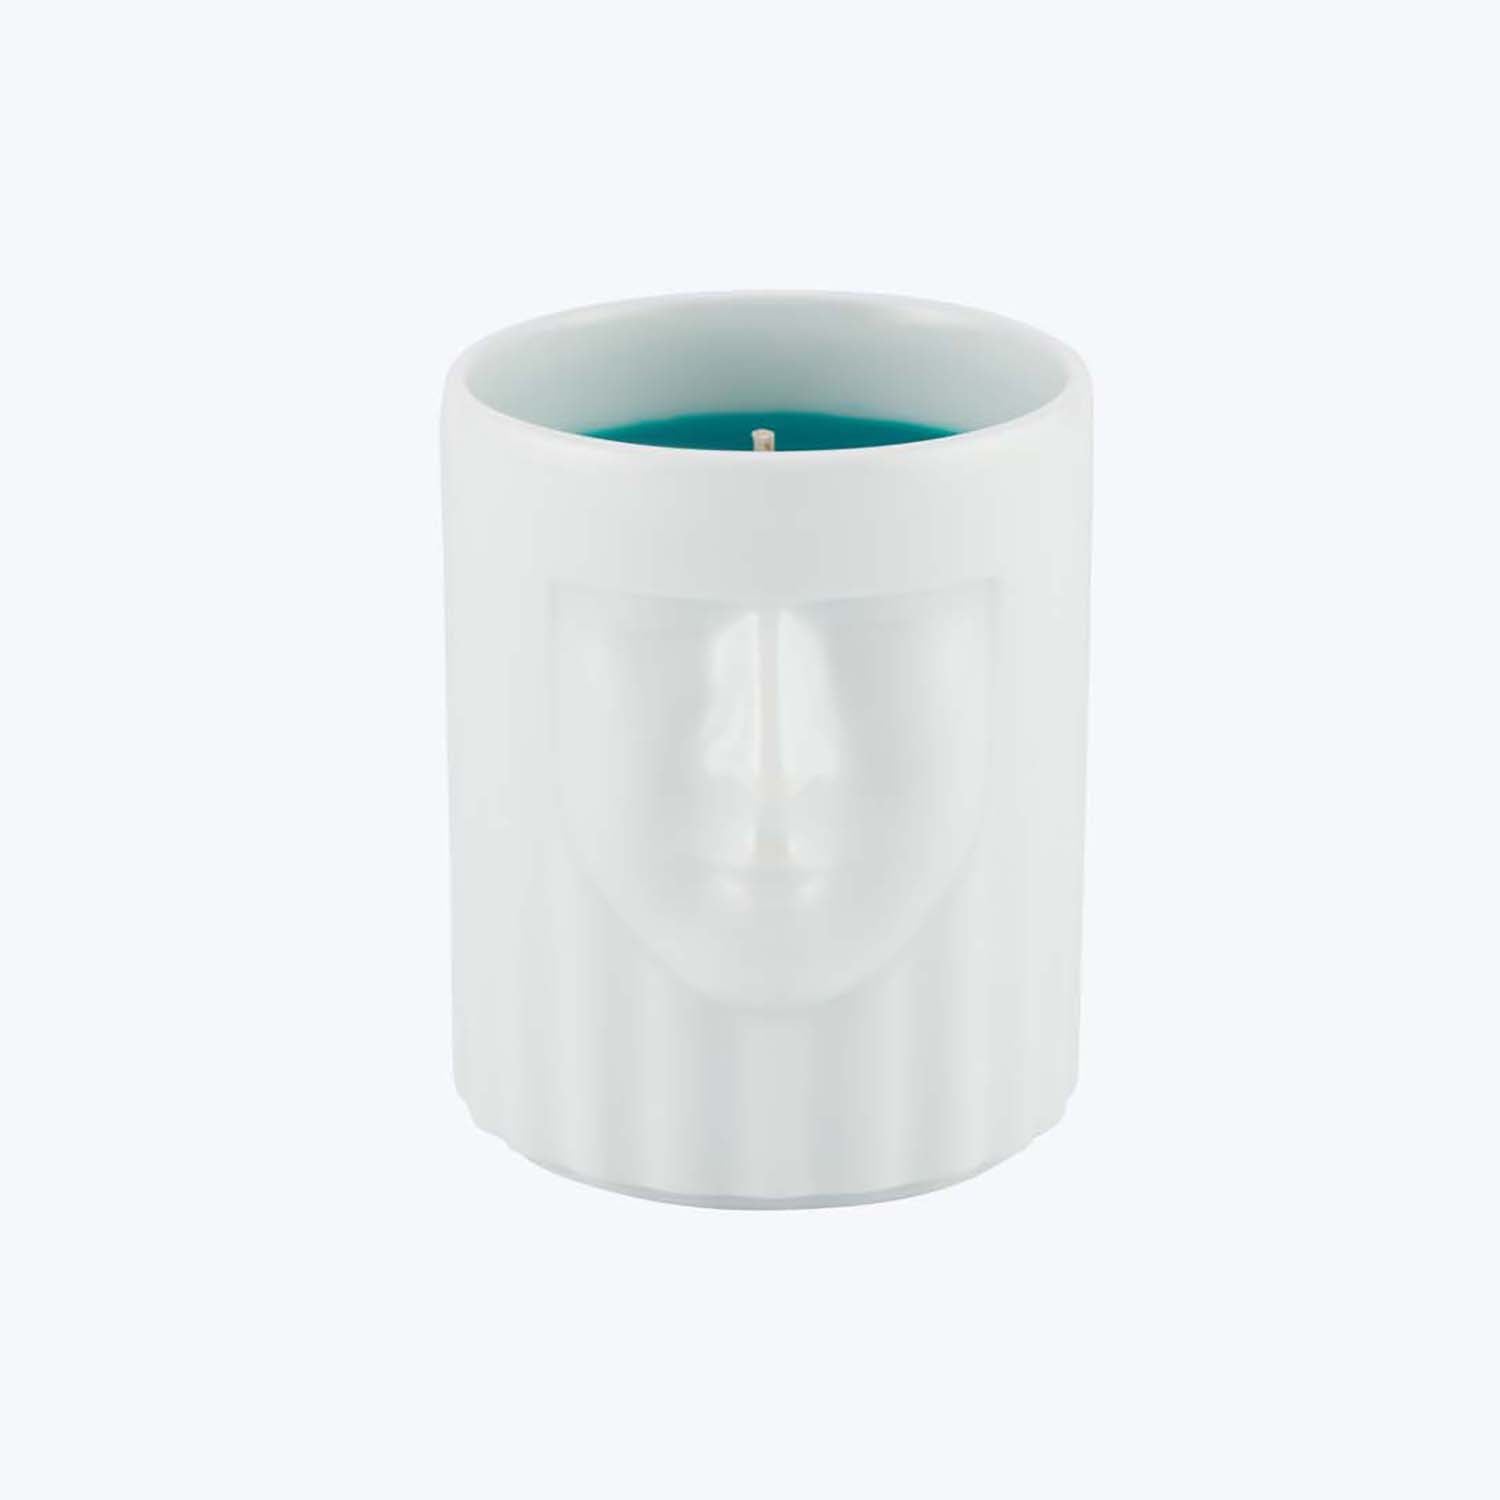 Minimalist cylindrical candle with relief sculpture of human face.